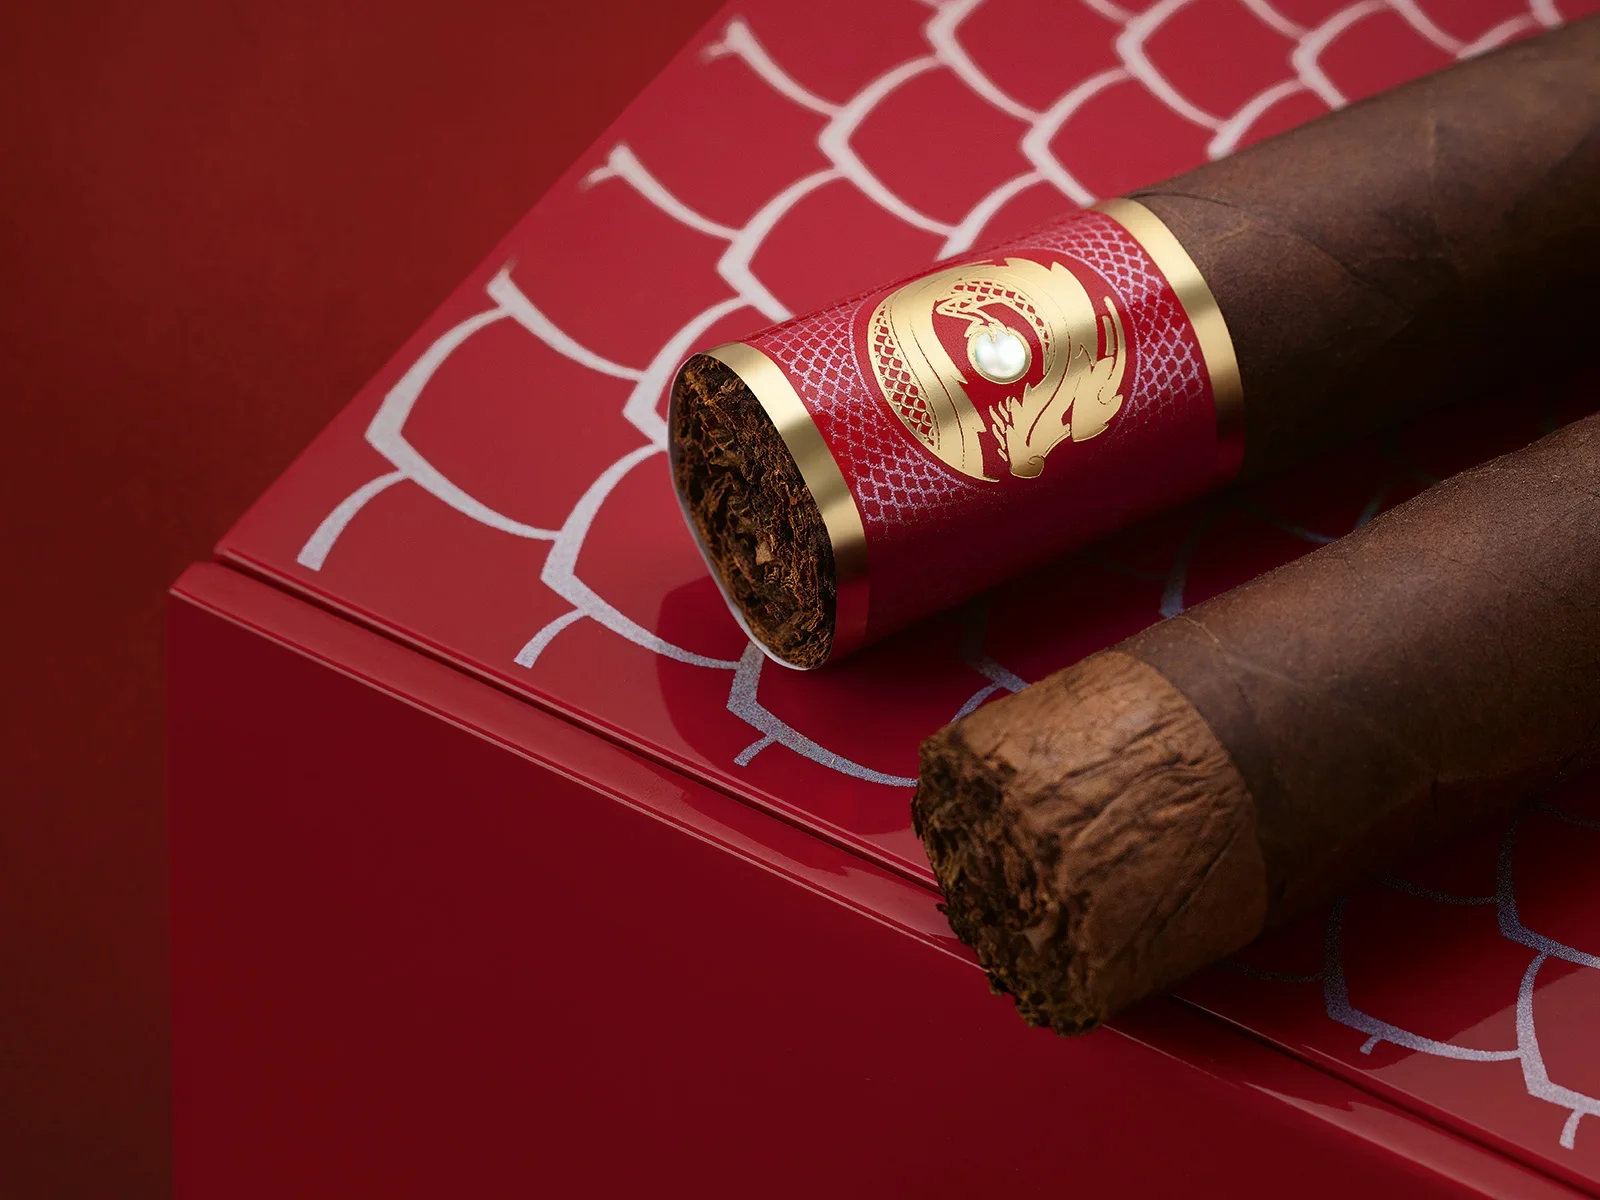 A Davidoff Year of the Dragon Limited Edition double corona cigar placed on the lid of its box.